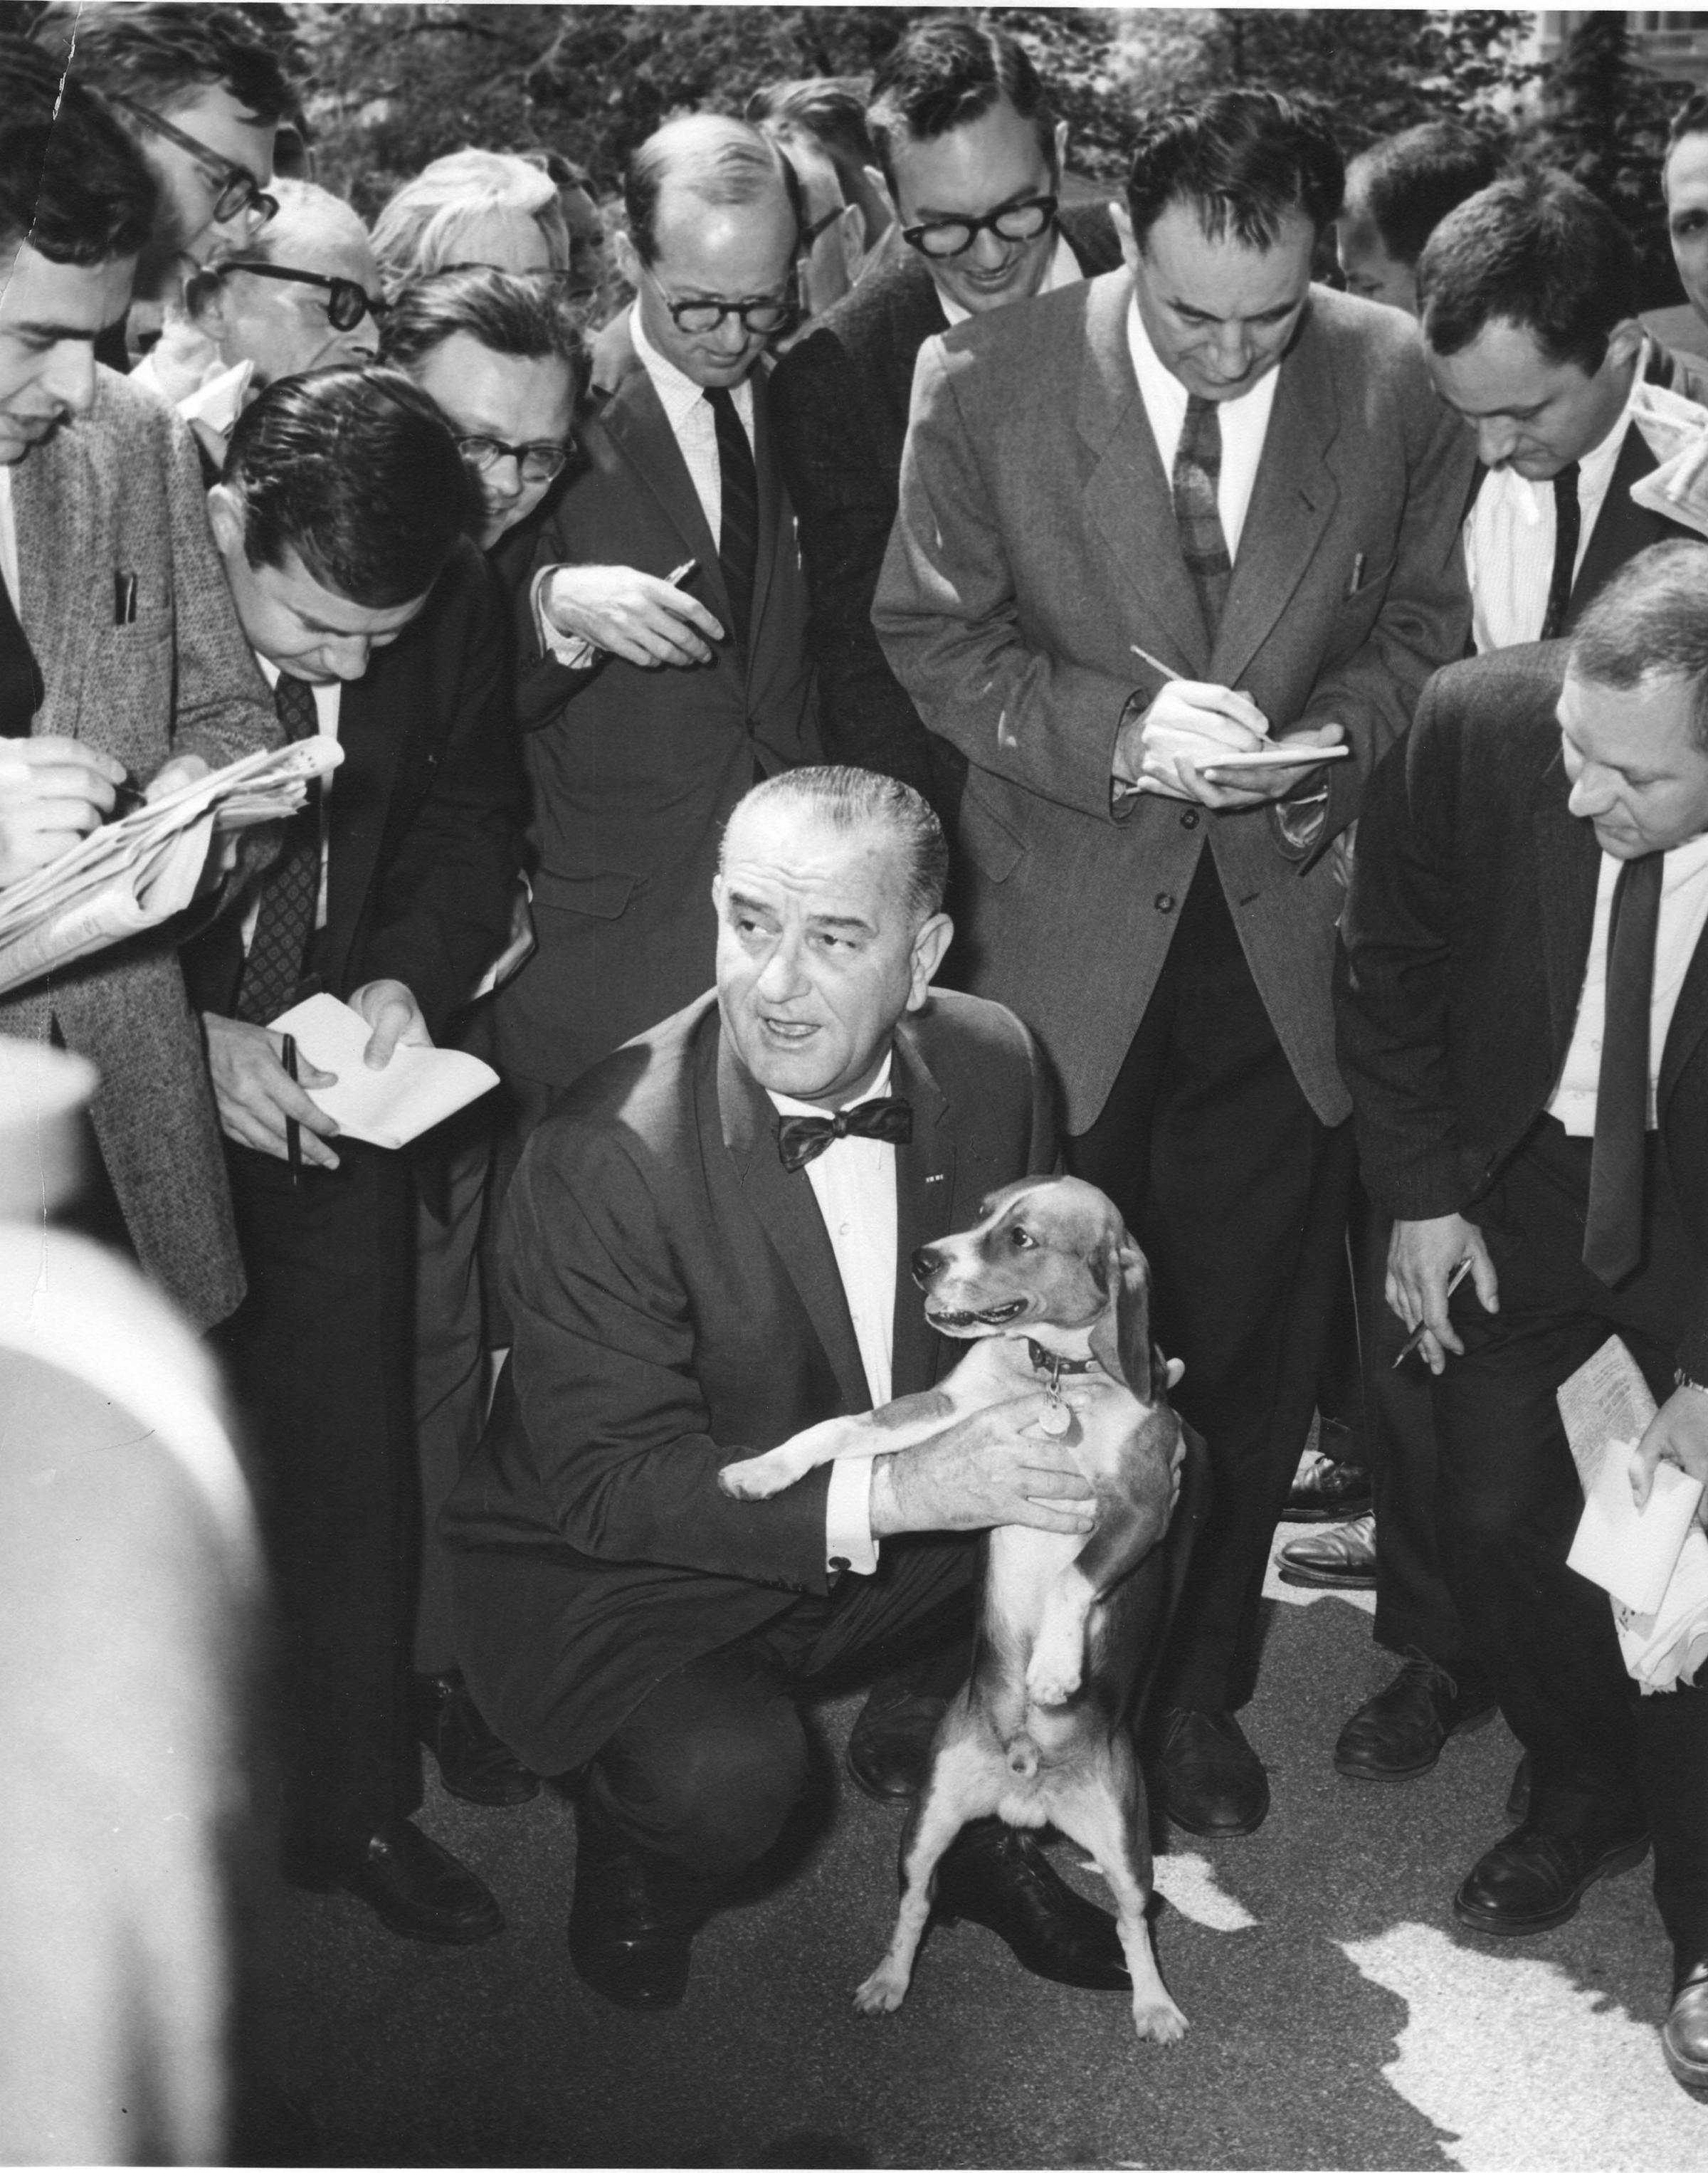 Lyndon Johnson holds one of his beagles, named Him, as he speaks with members of the White House press corps in Washington D.C., May 2 1964.